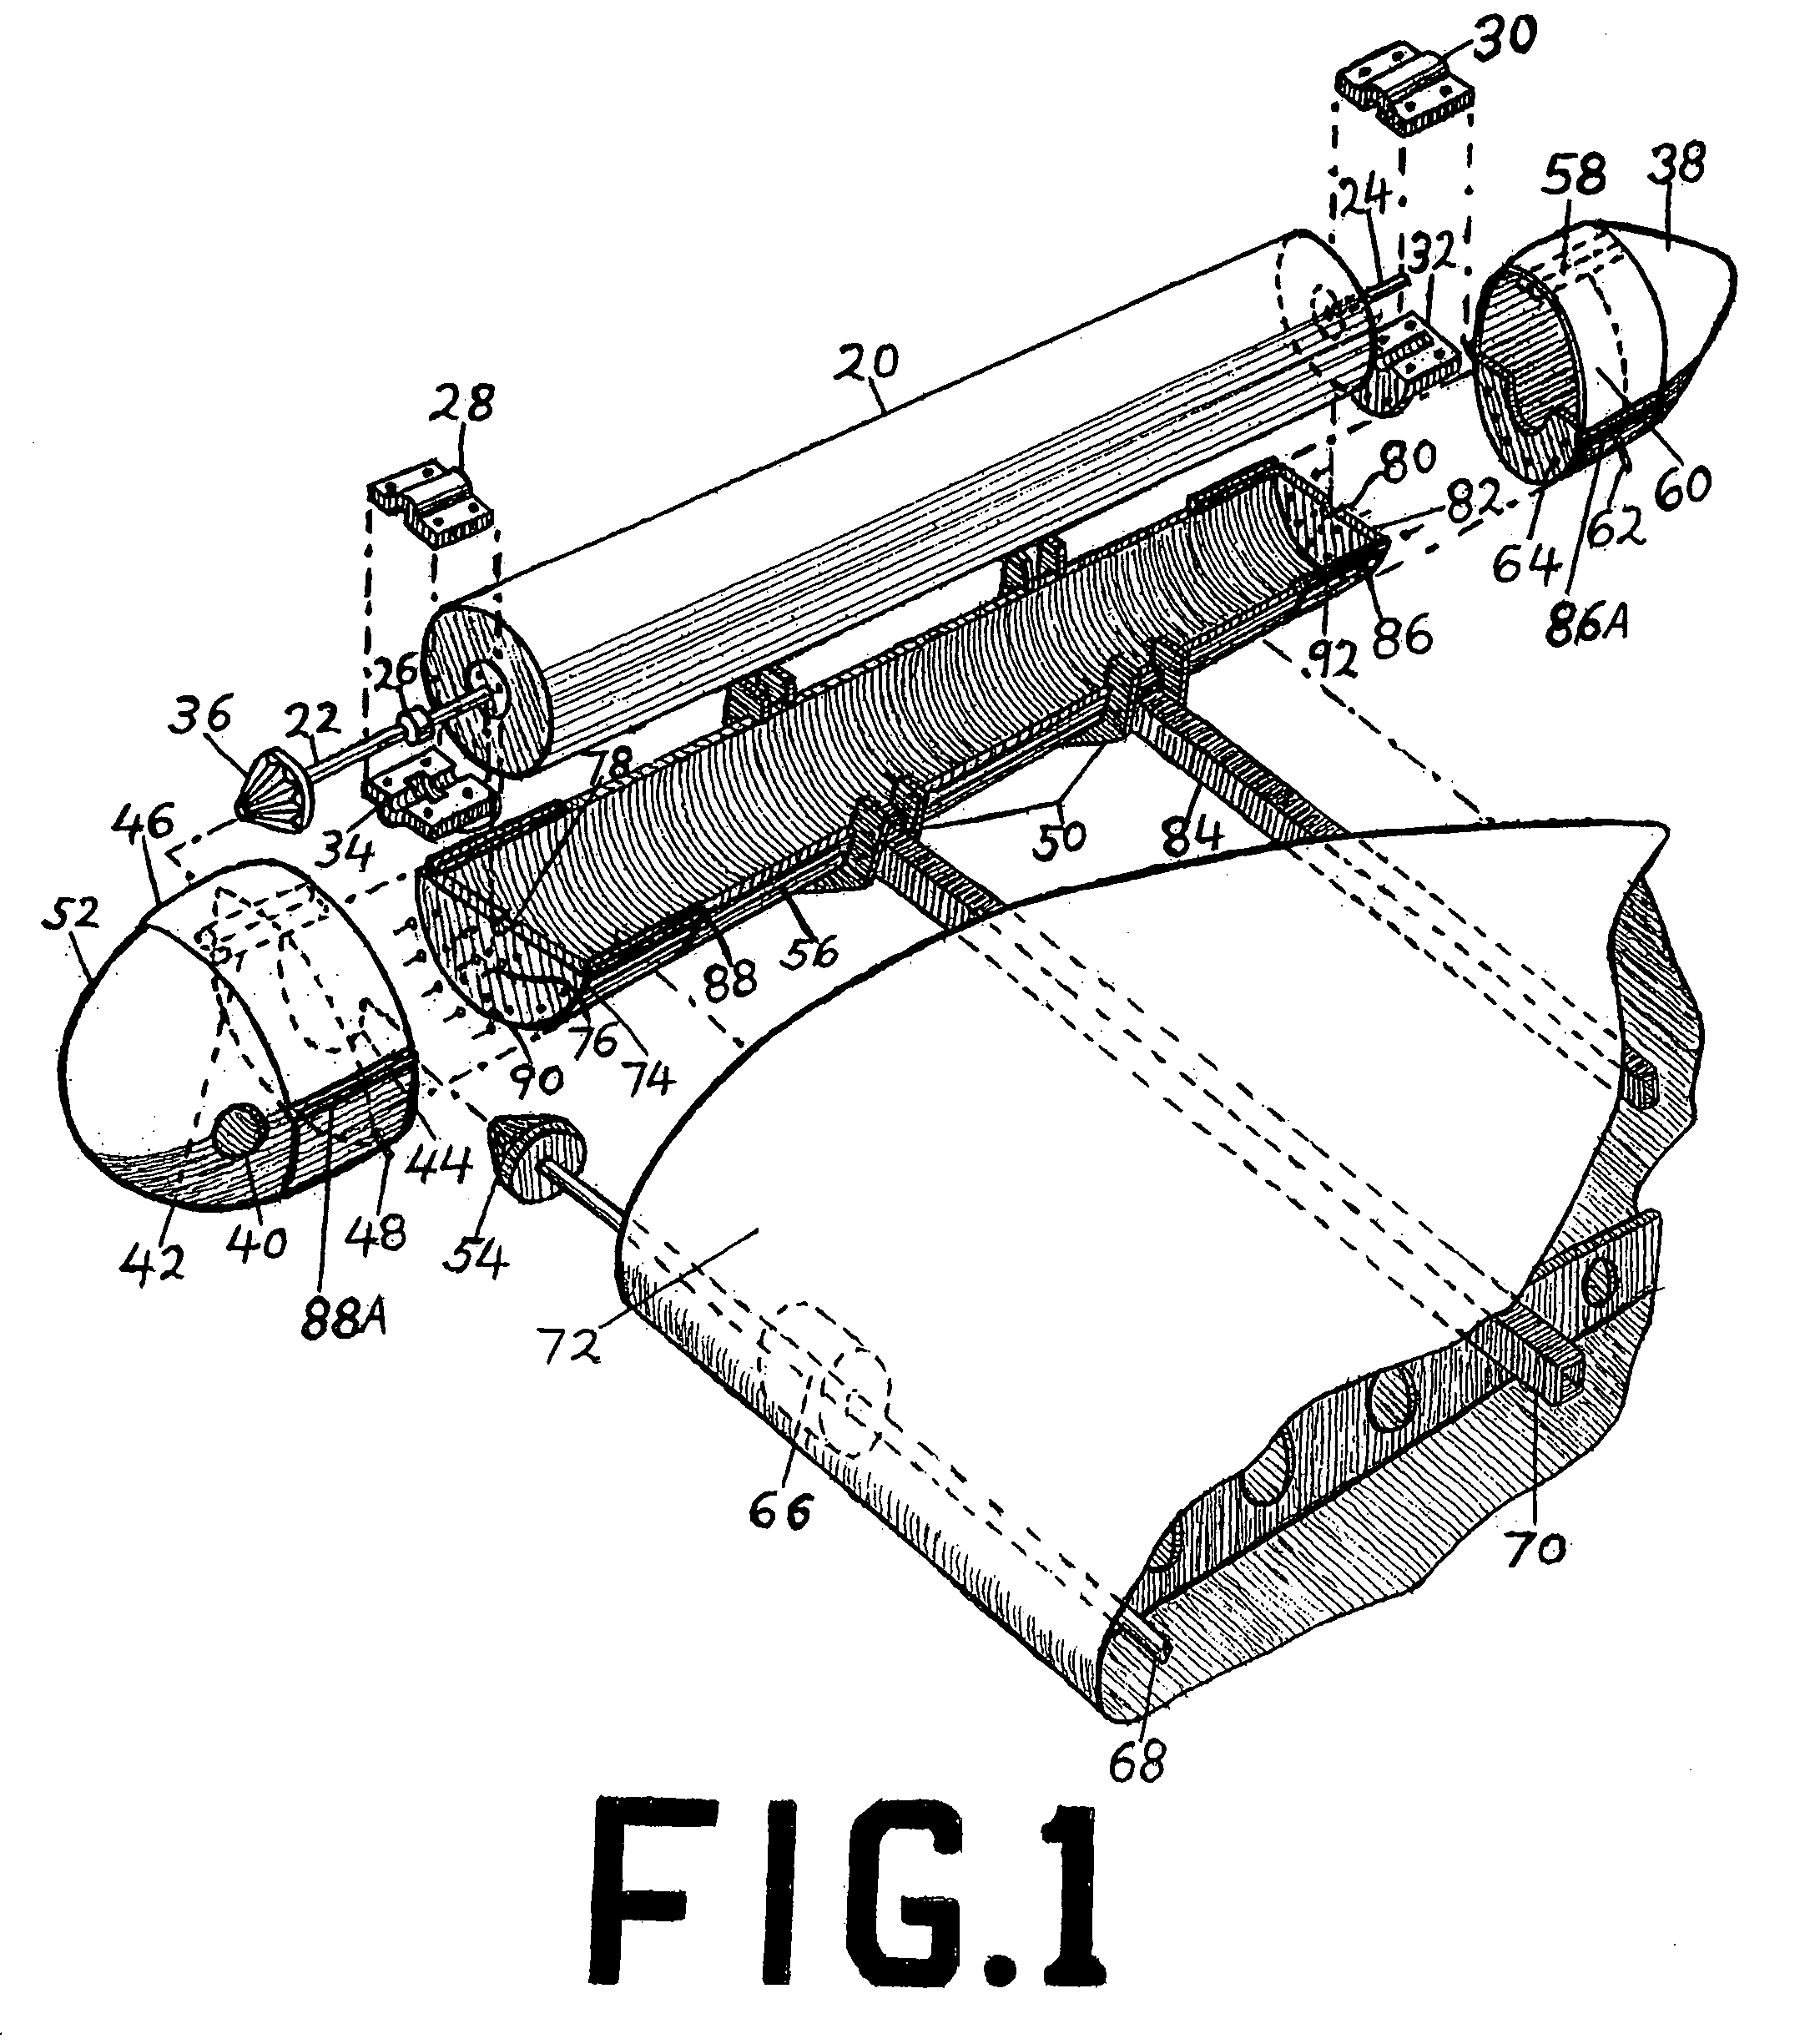 Lift unit for vertical take-off and landing aerial vehicle